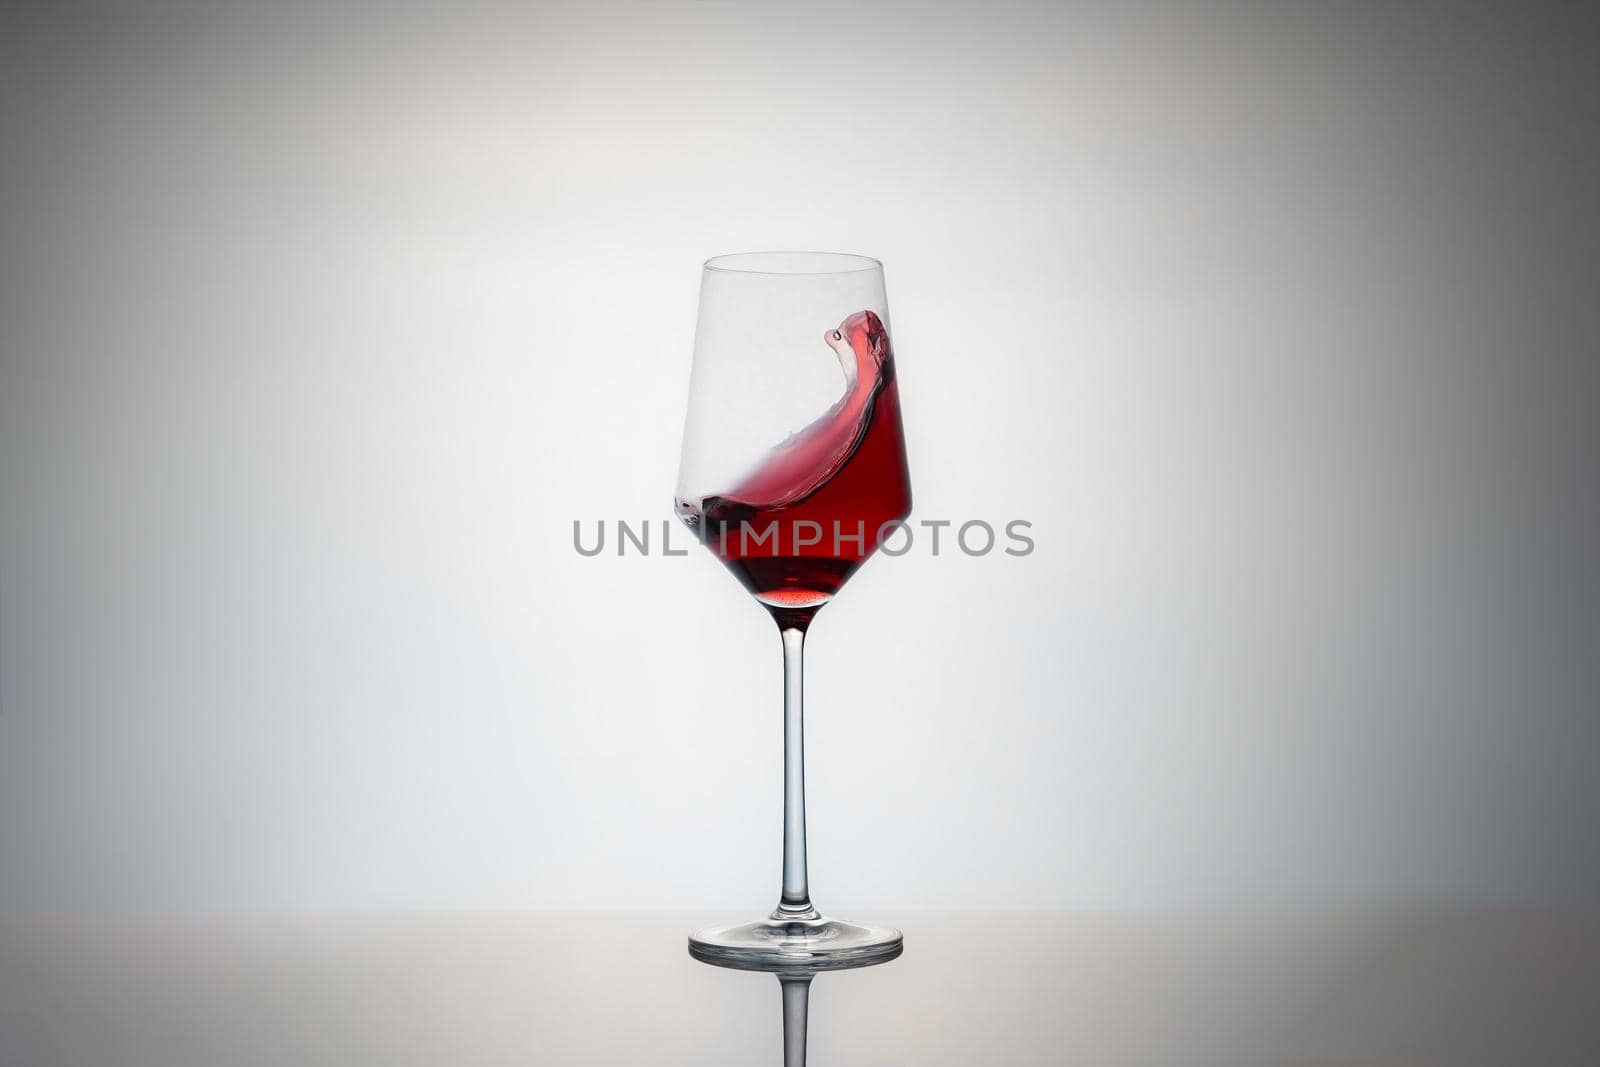 movement of a crystal glass full of red wine. red wine glass isolated on grey background with reflection on the base and vignetting. image to crop. by CatPhotography